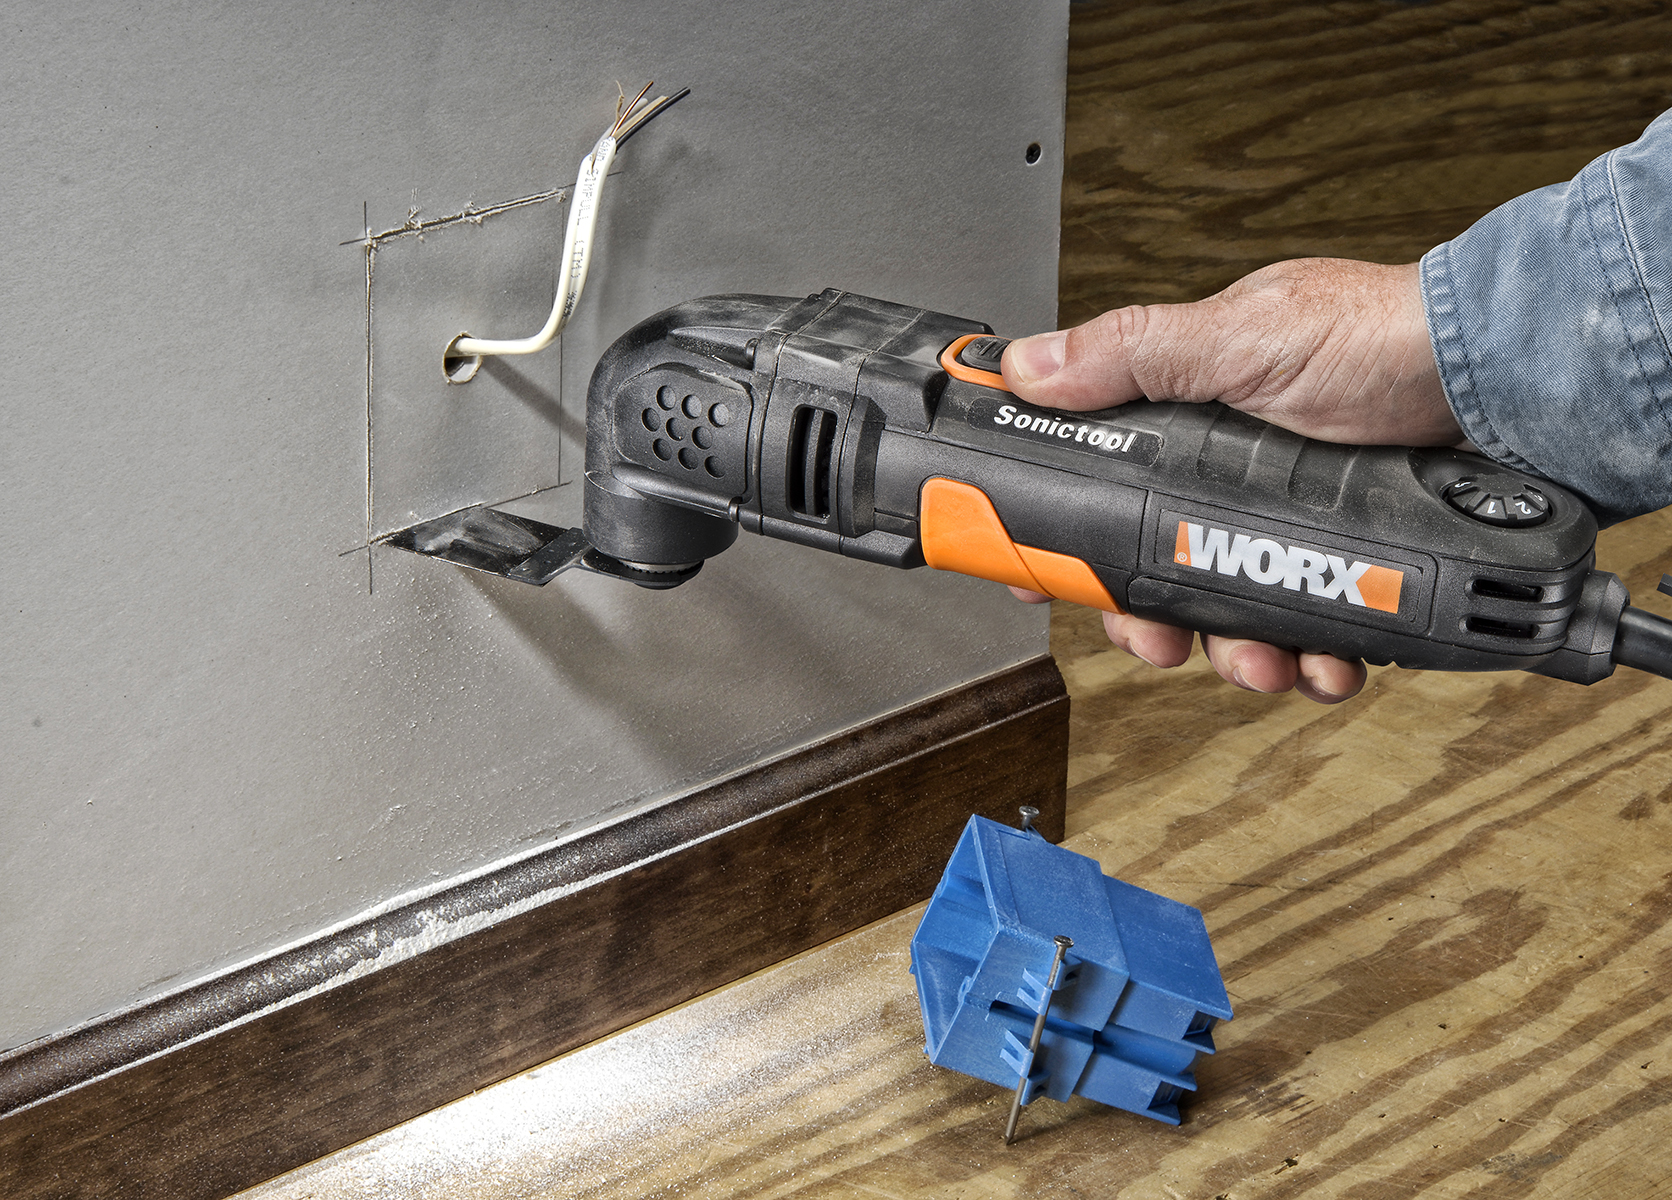 WORX 3.0 Amp Oscillating Tool making plunge cuts in drywall